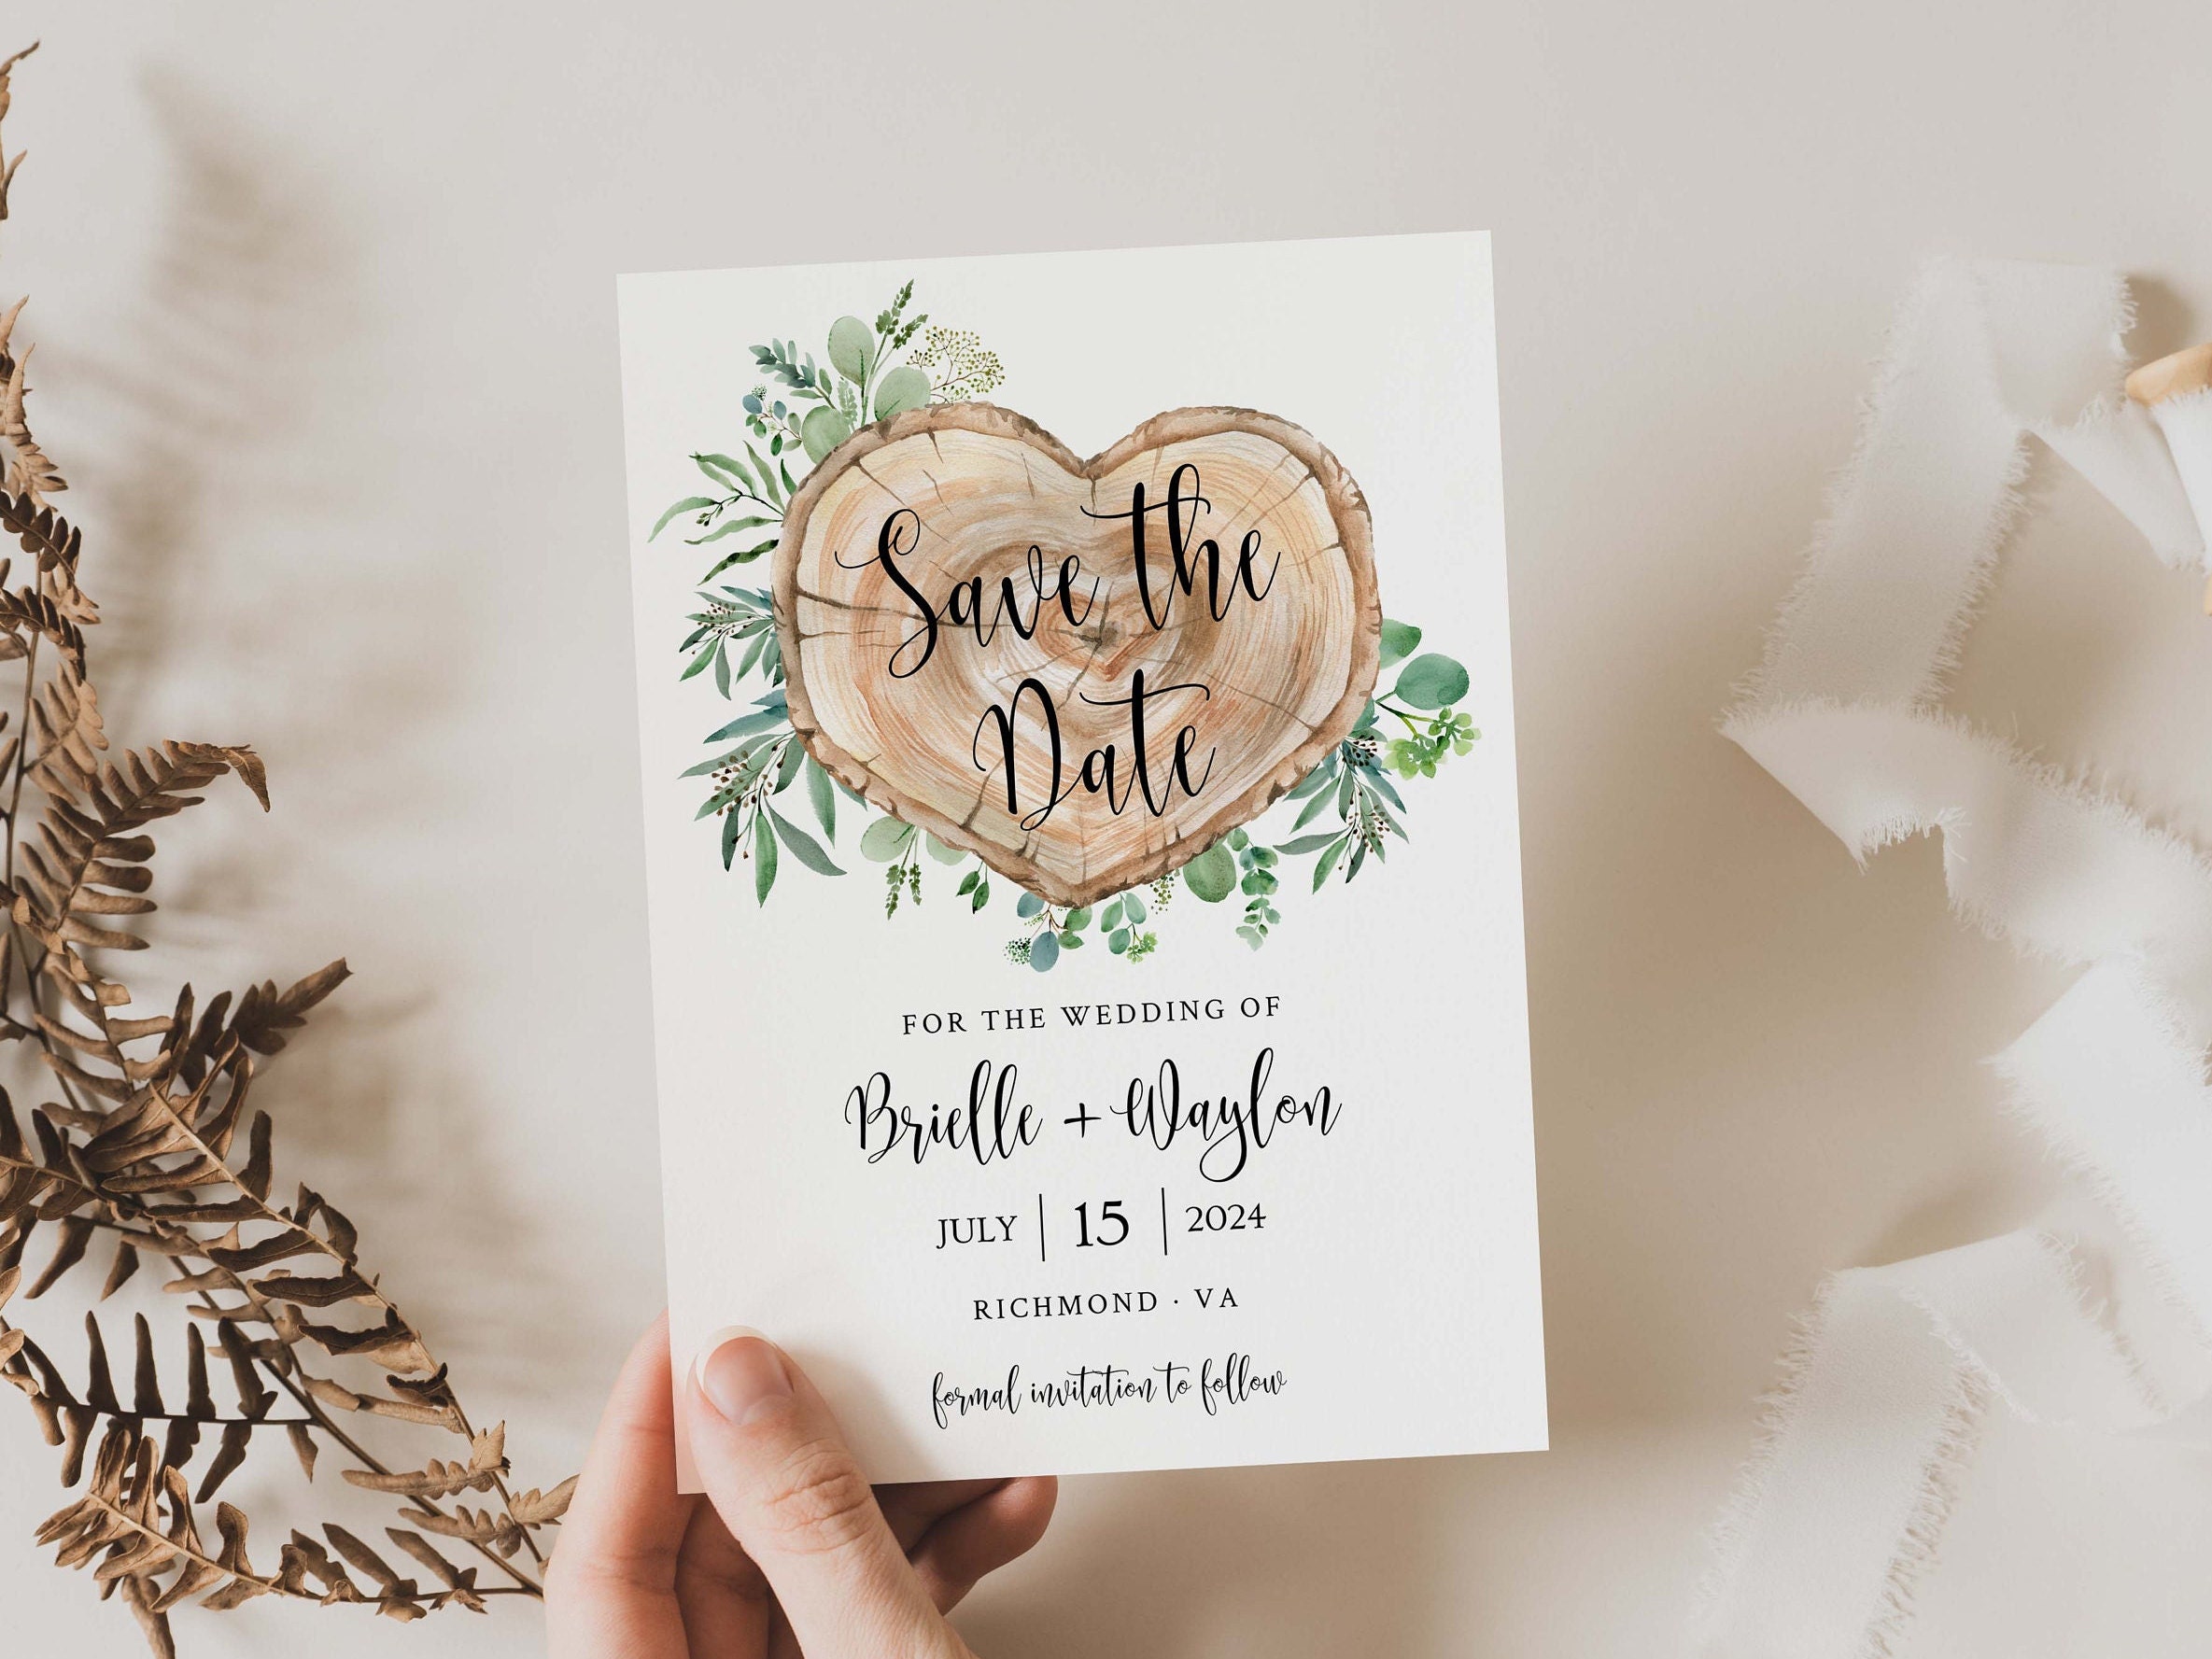 Personalize ADVENTURE Wooden Save the date Magnets, Rustic Wedding Mag –  DokkiDesign